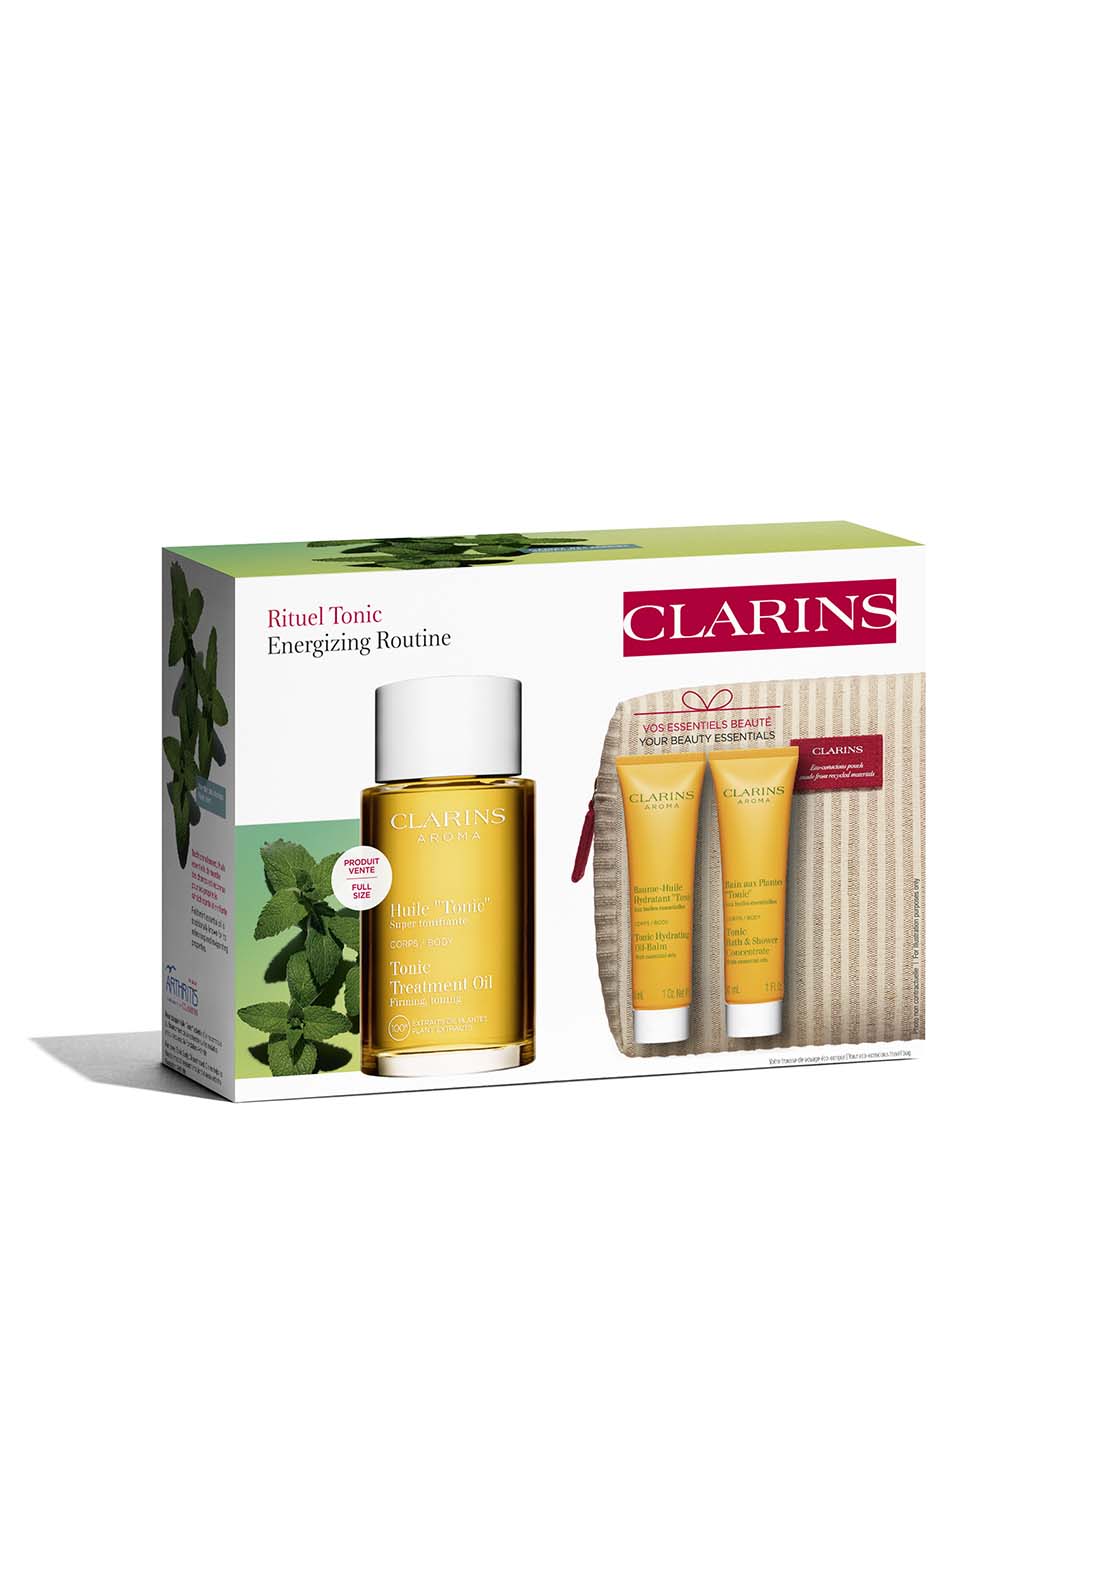 Clarins Clarins Tonic Gift Set 1 Shaws Department Stores